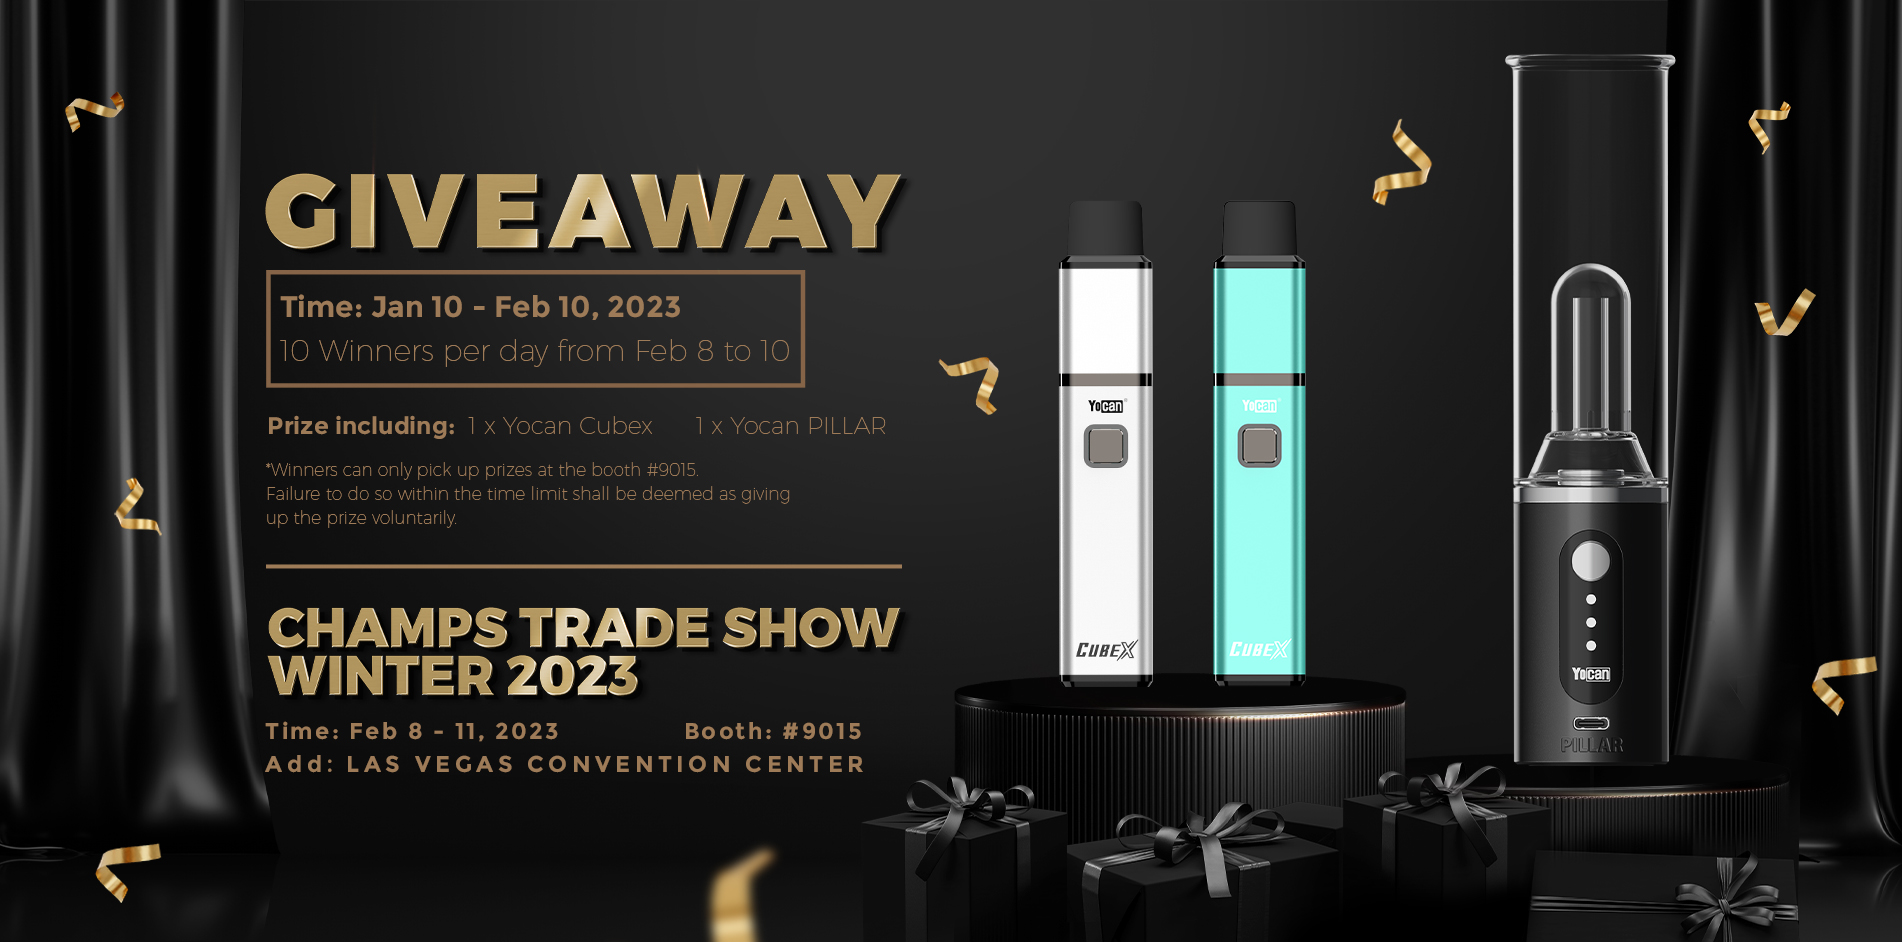 Giveaway for CHAMPS Trade Show Winter 2023